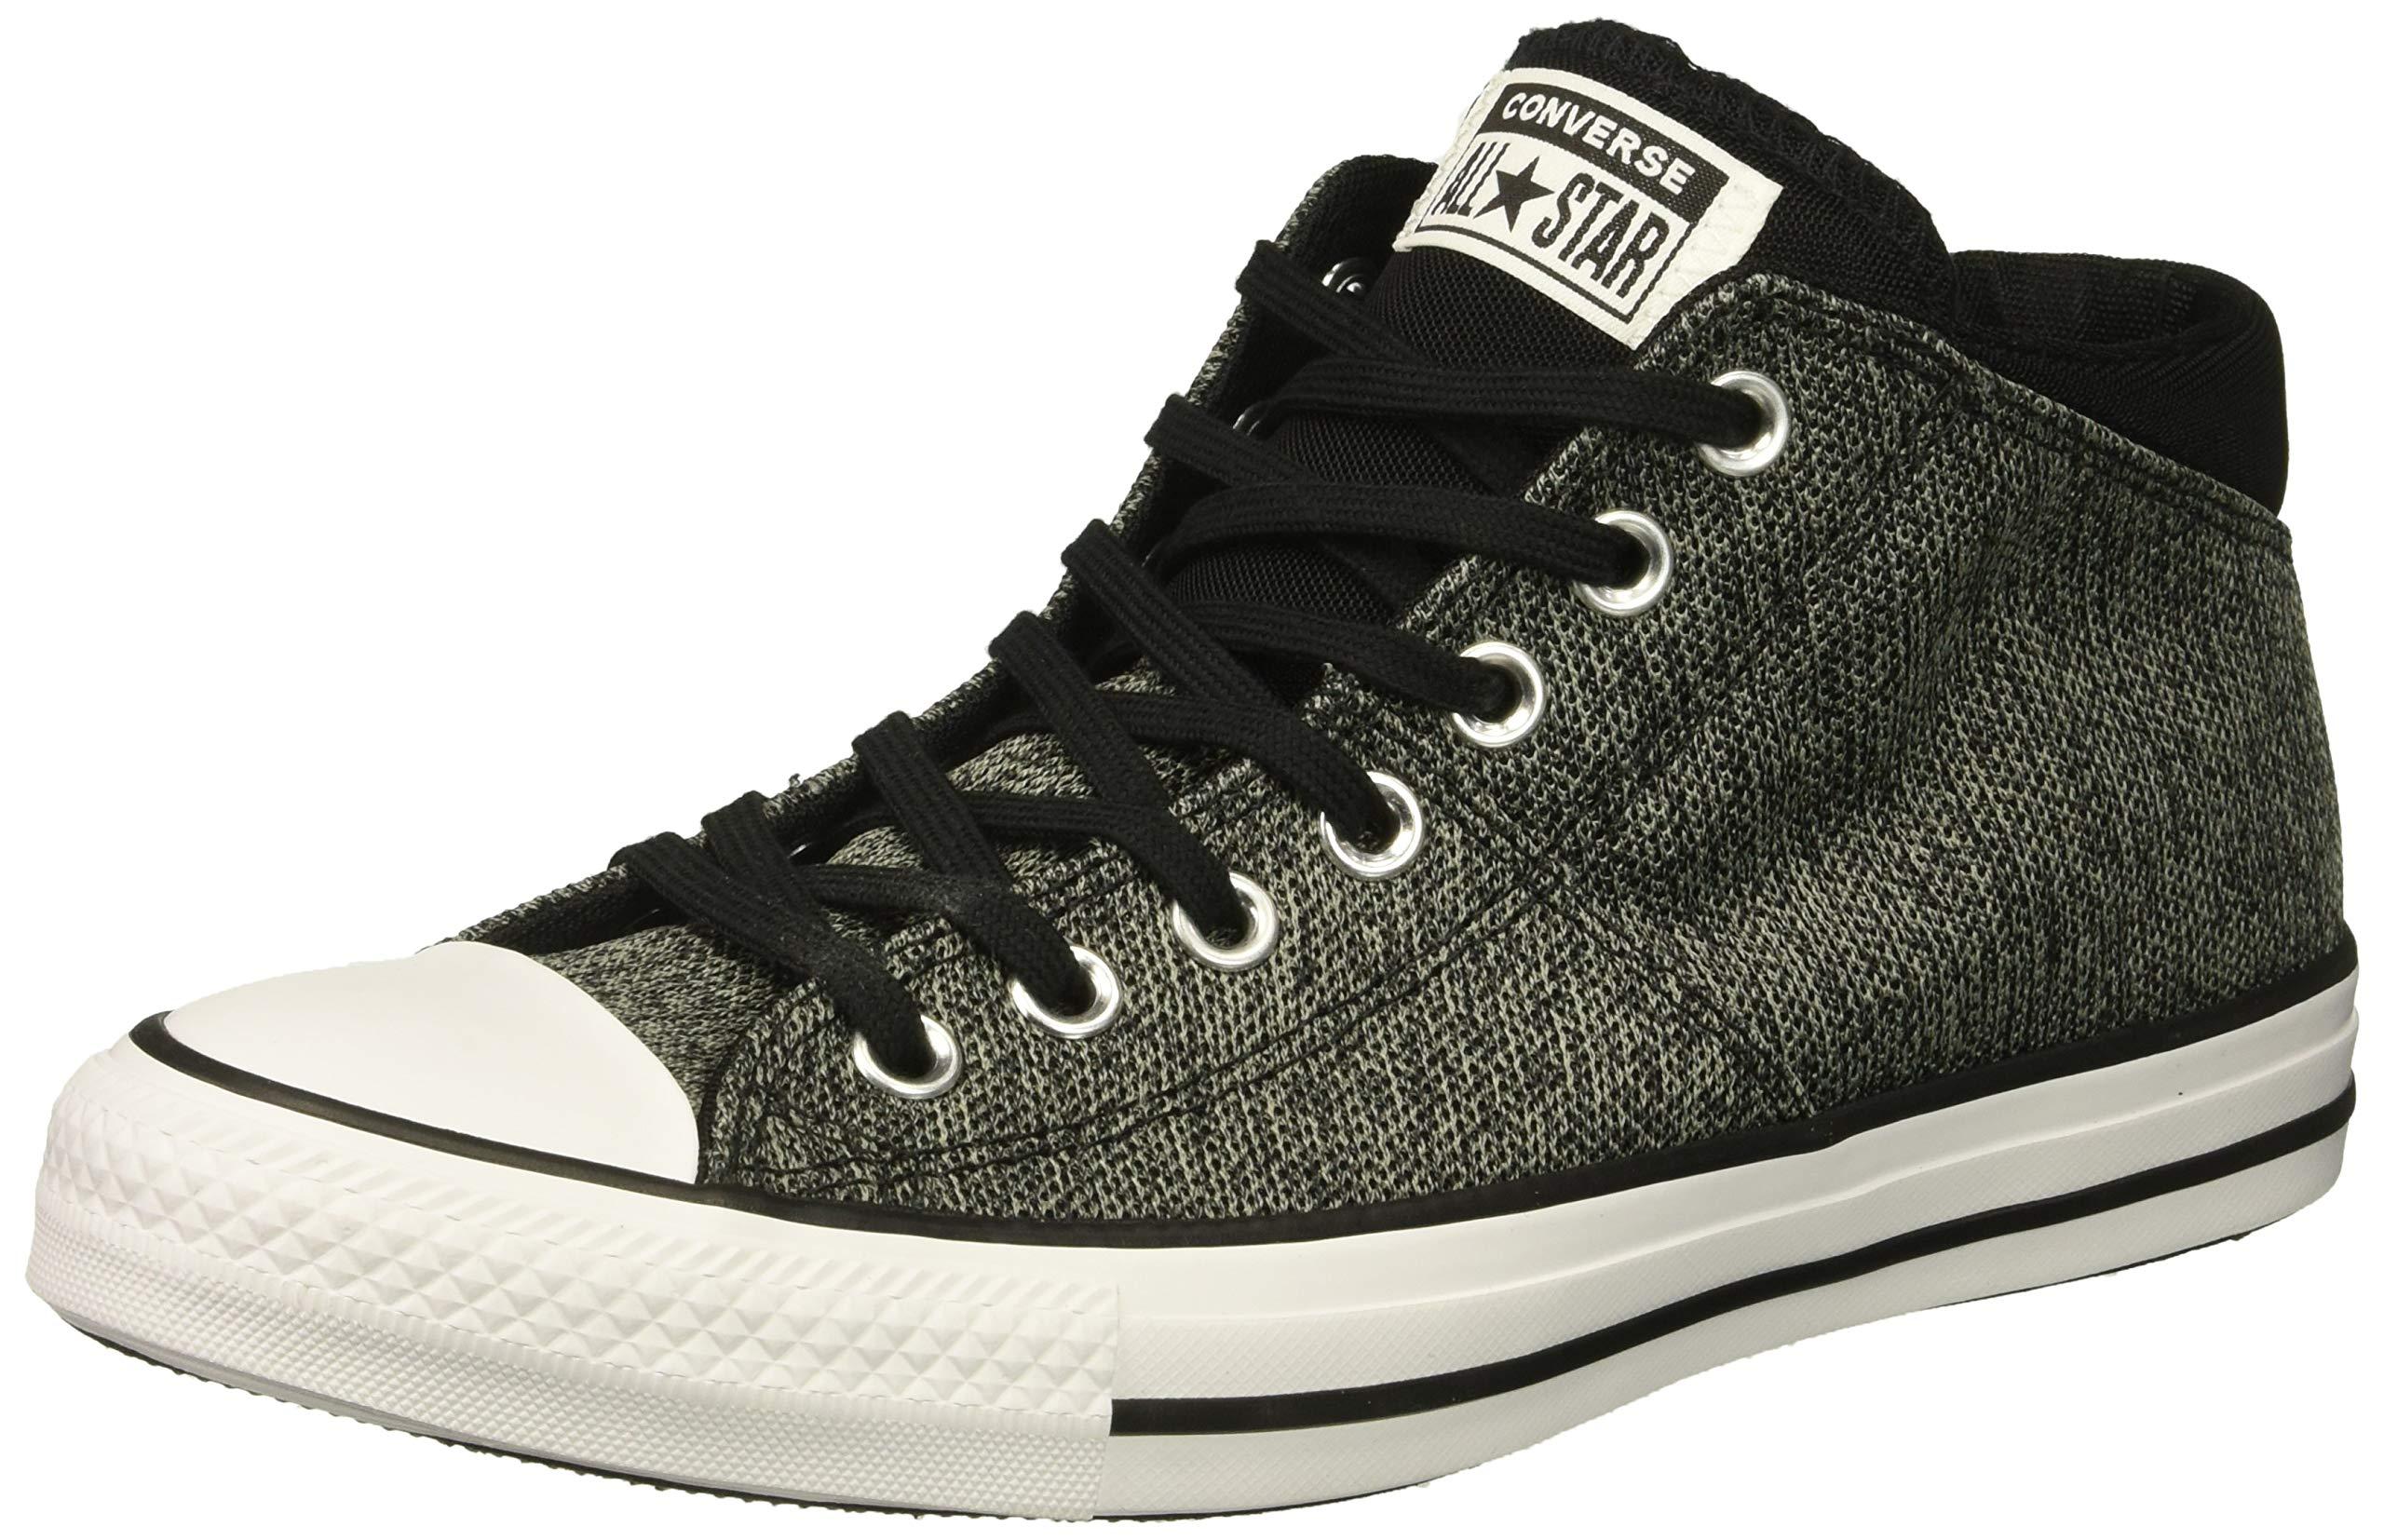 Converse Chuck Taylor All Star Knit Madison Mid Sneaker in Black | Lyst